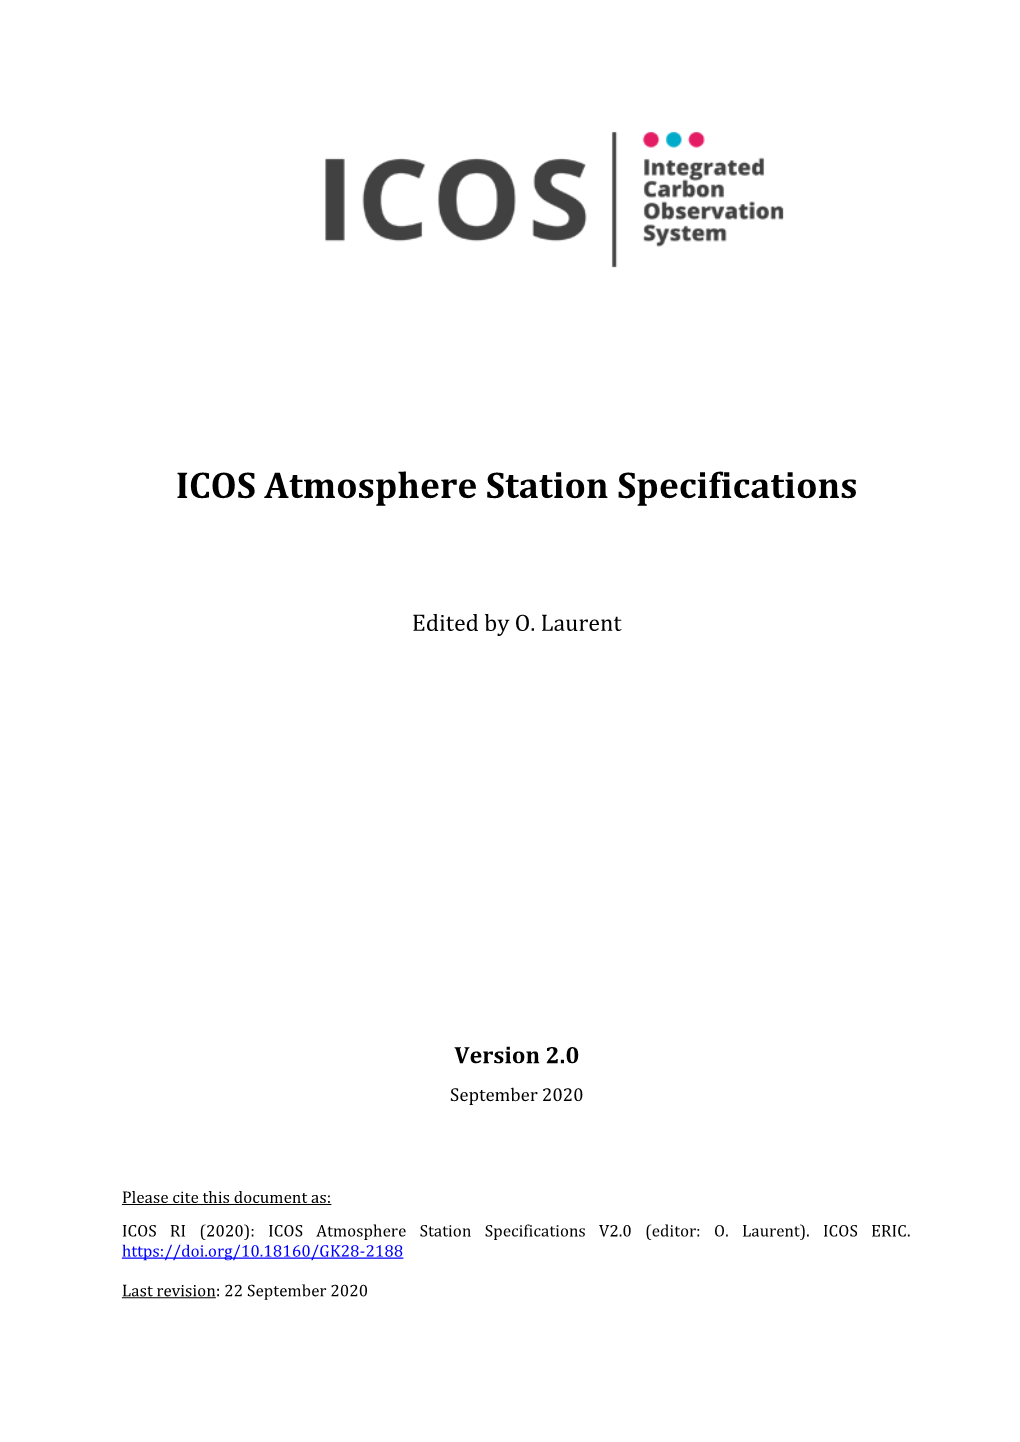 ICOS Atmosphere Station Specifications